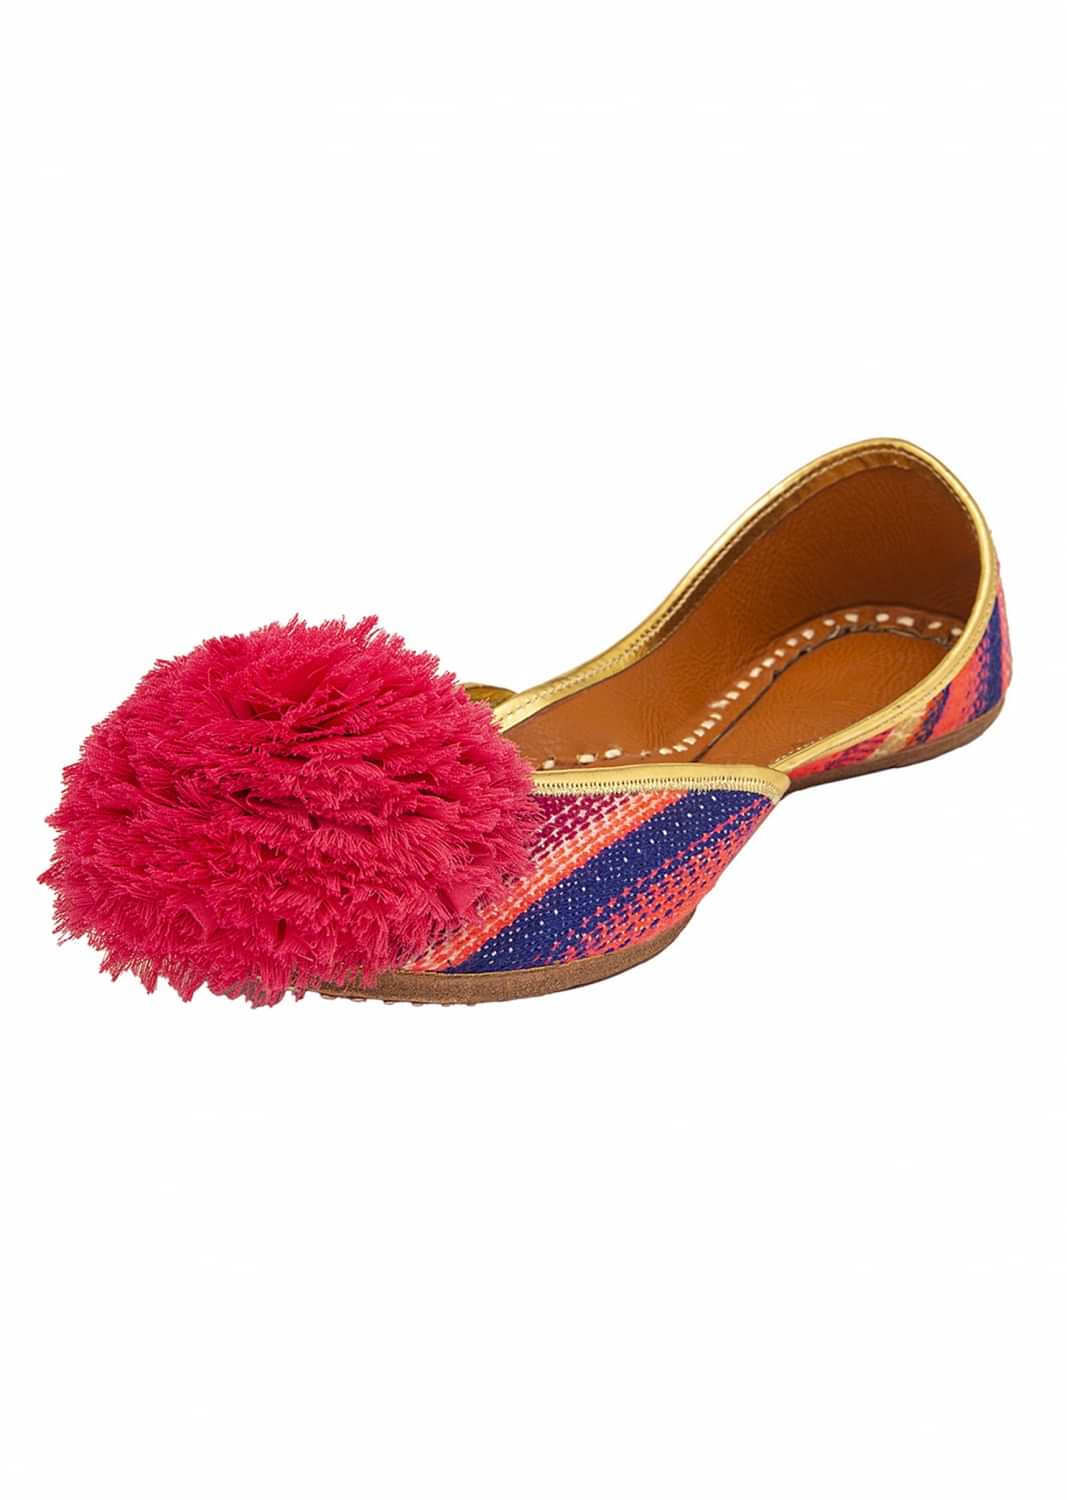 Multicoloured Juttis In A Quirky & Chicy Look With A Huge Pink Pom-Pom